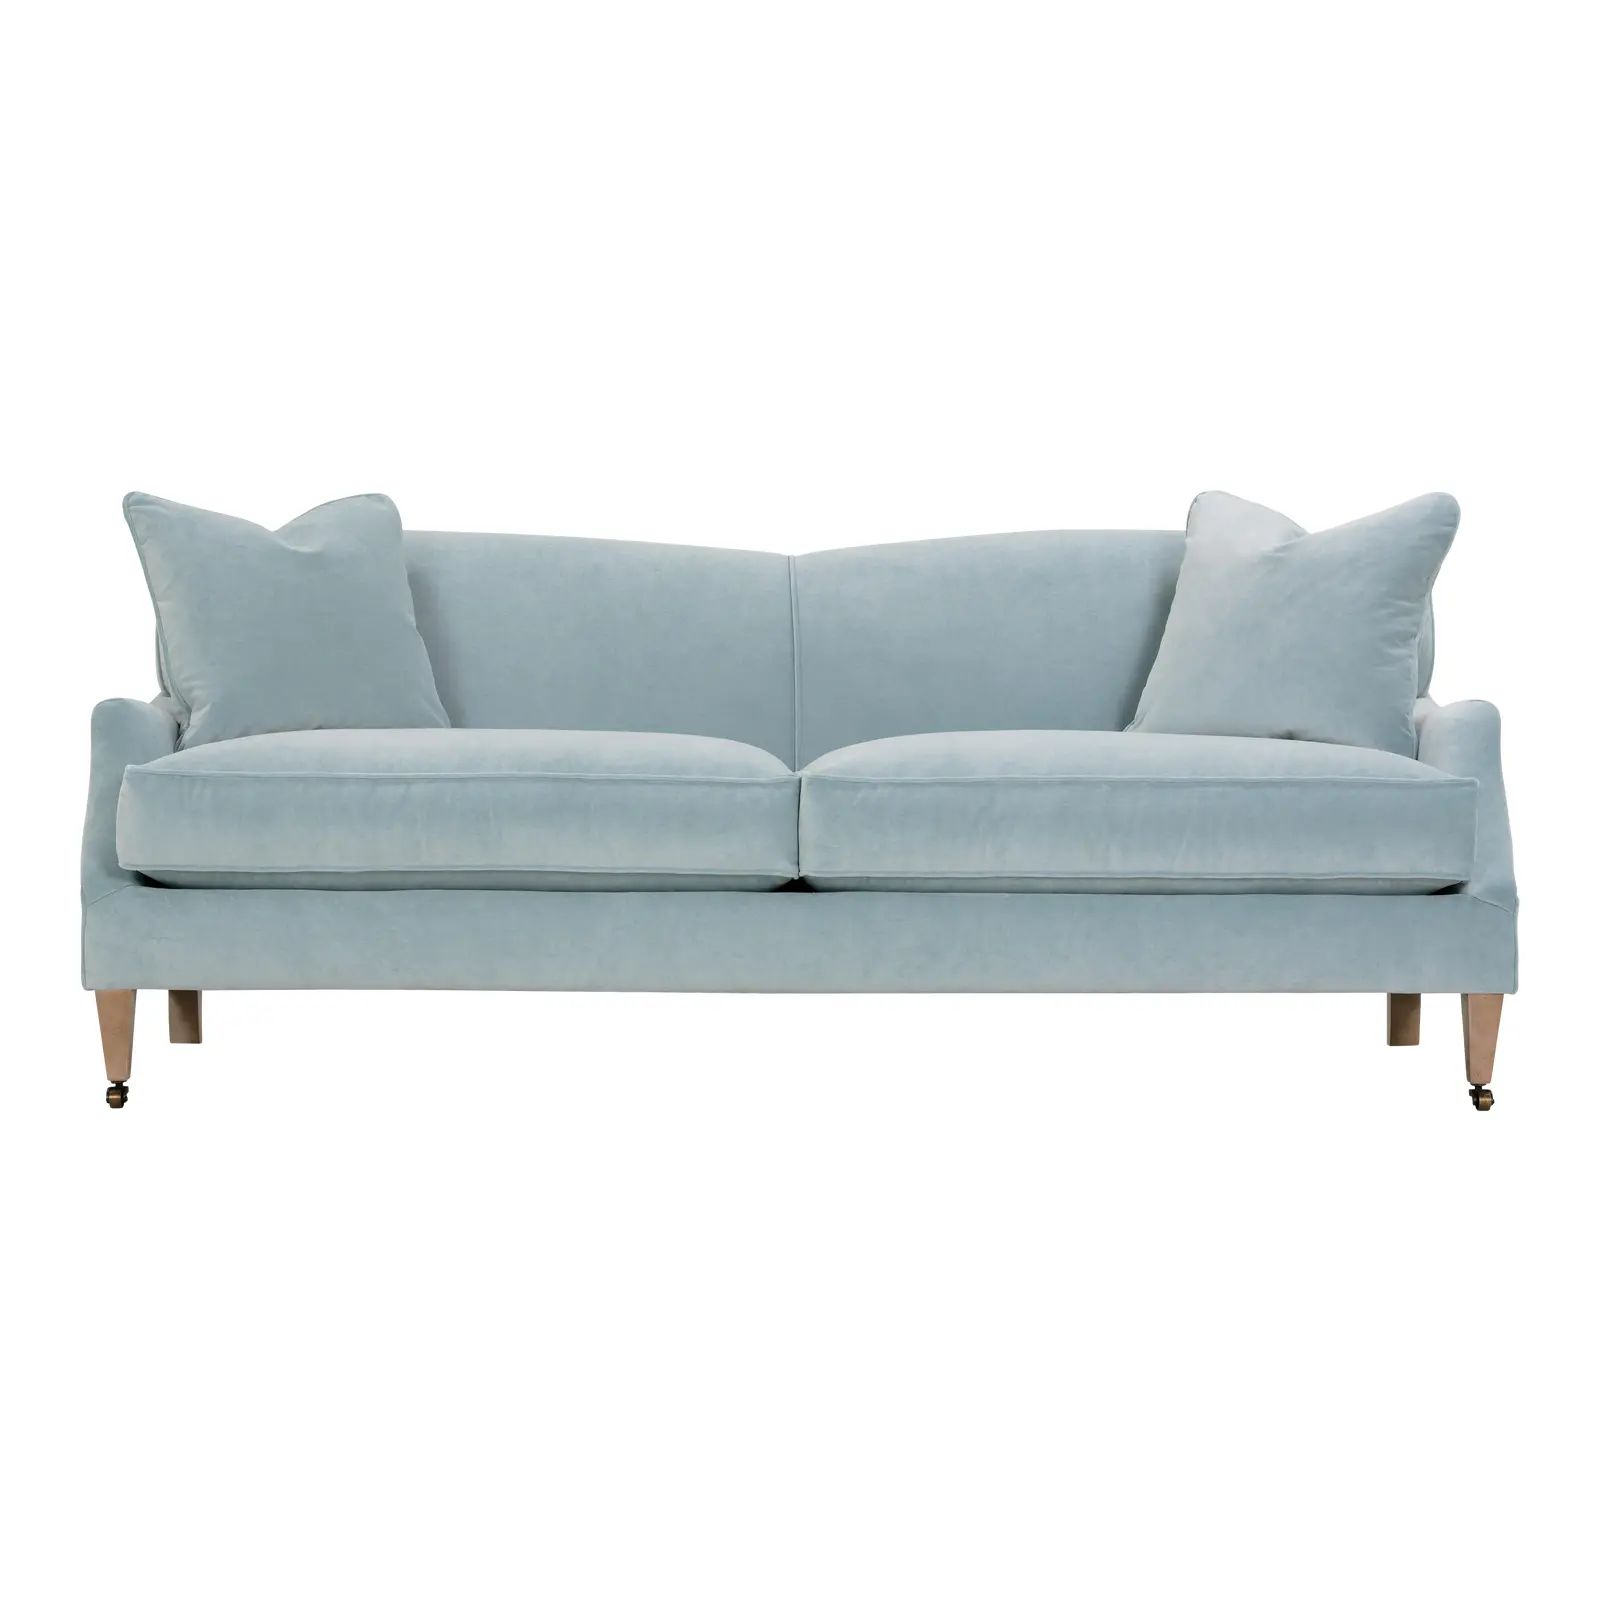 Tilly Sofa, Light Blue Velvet, Washed Oak Legs with Casters | Chairish